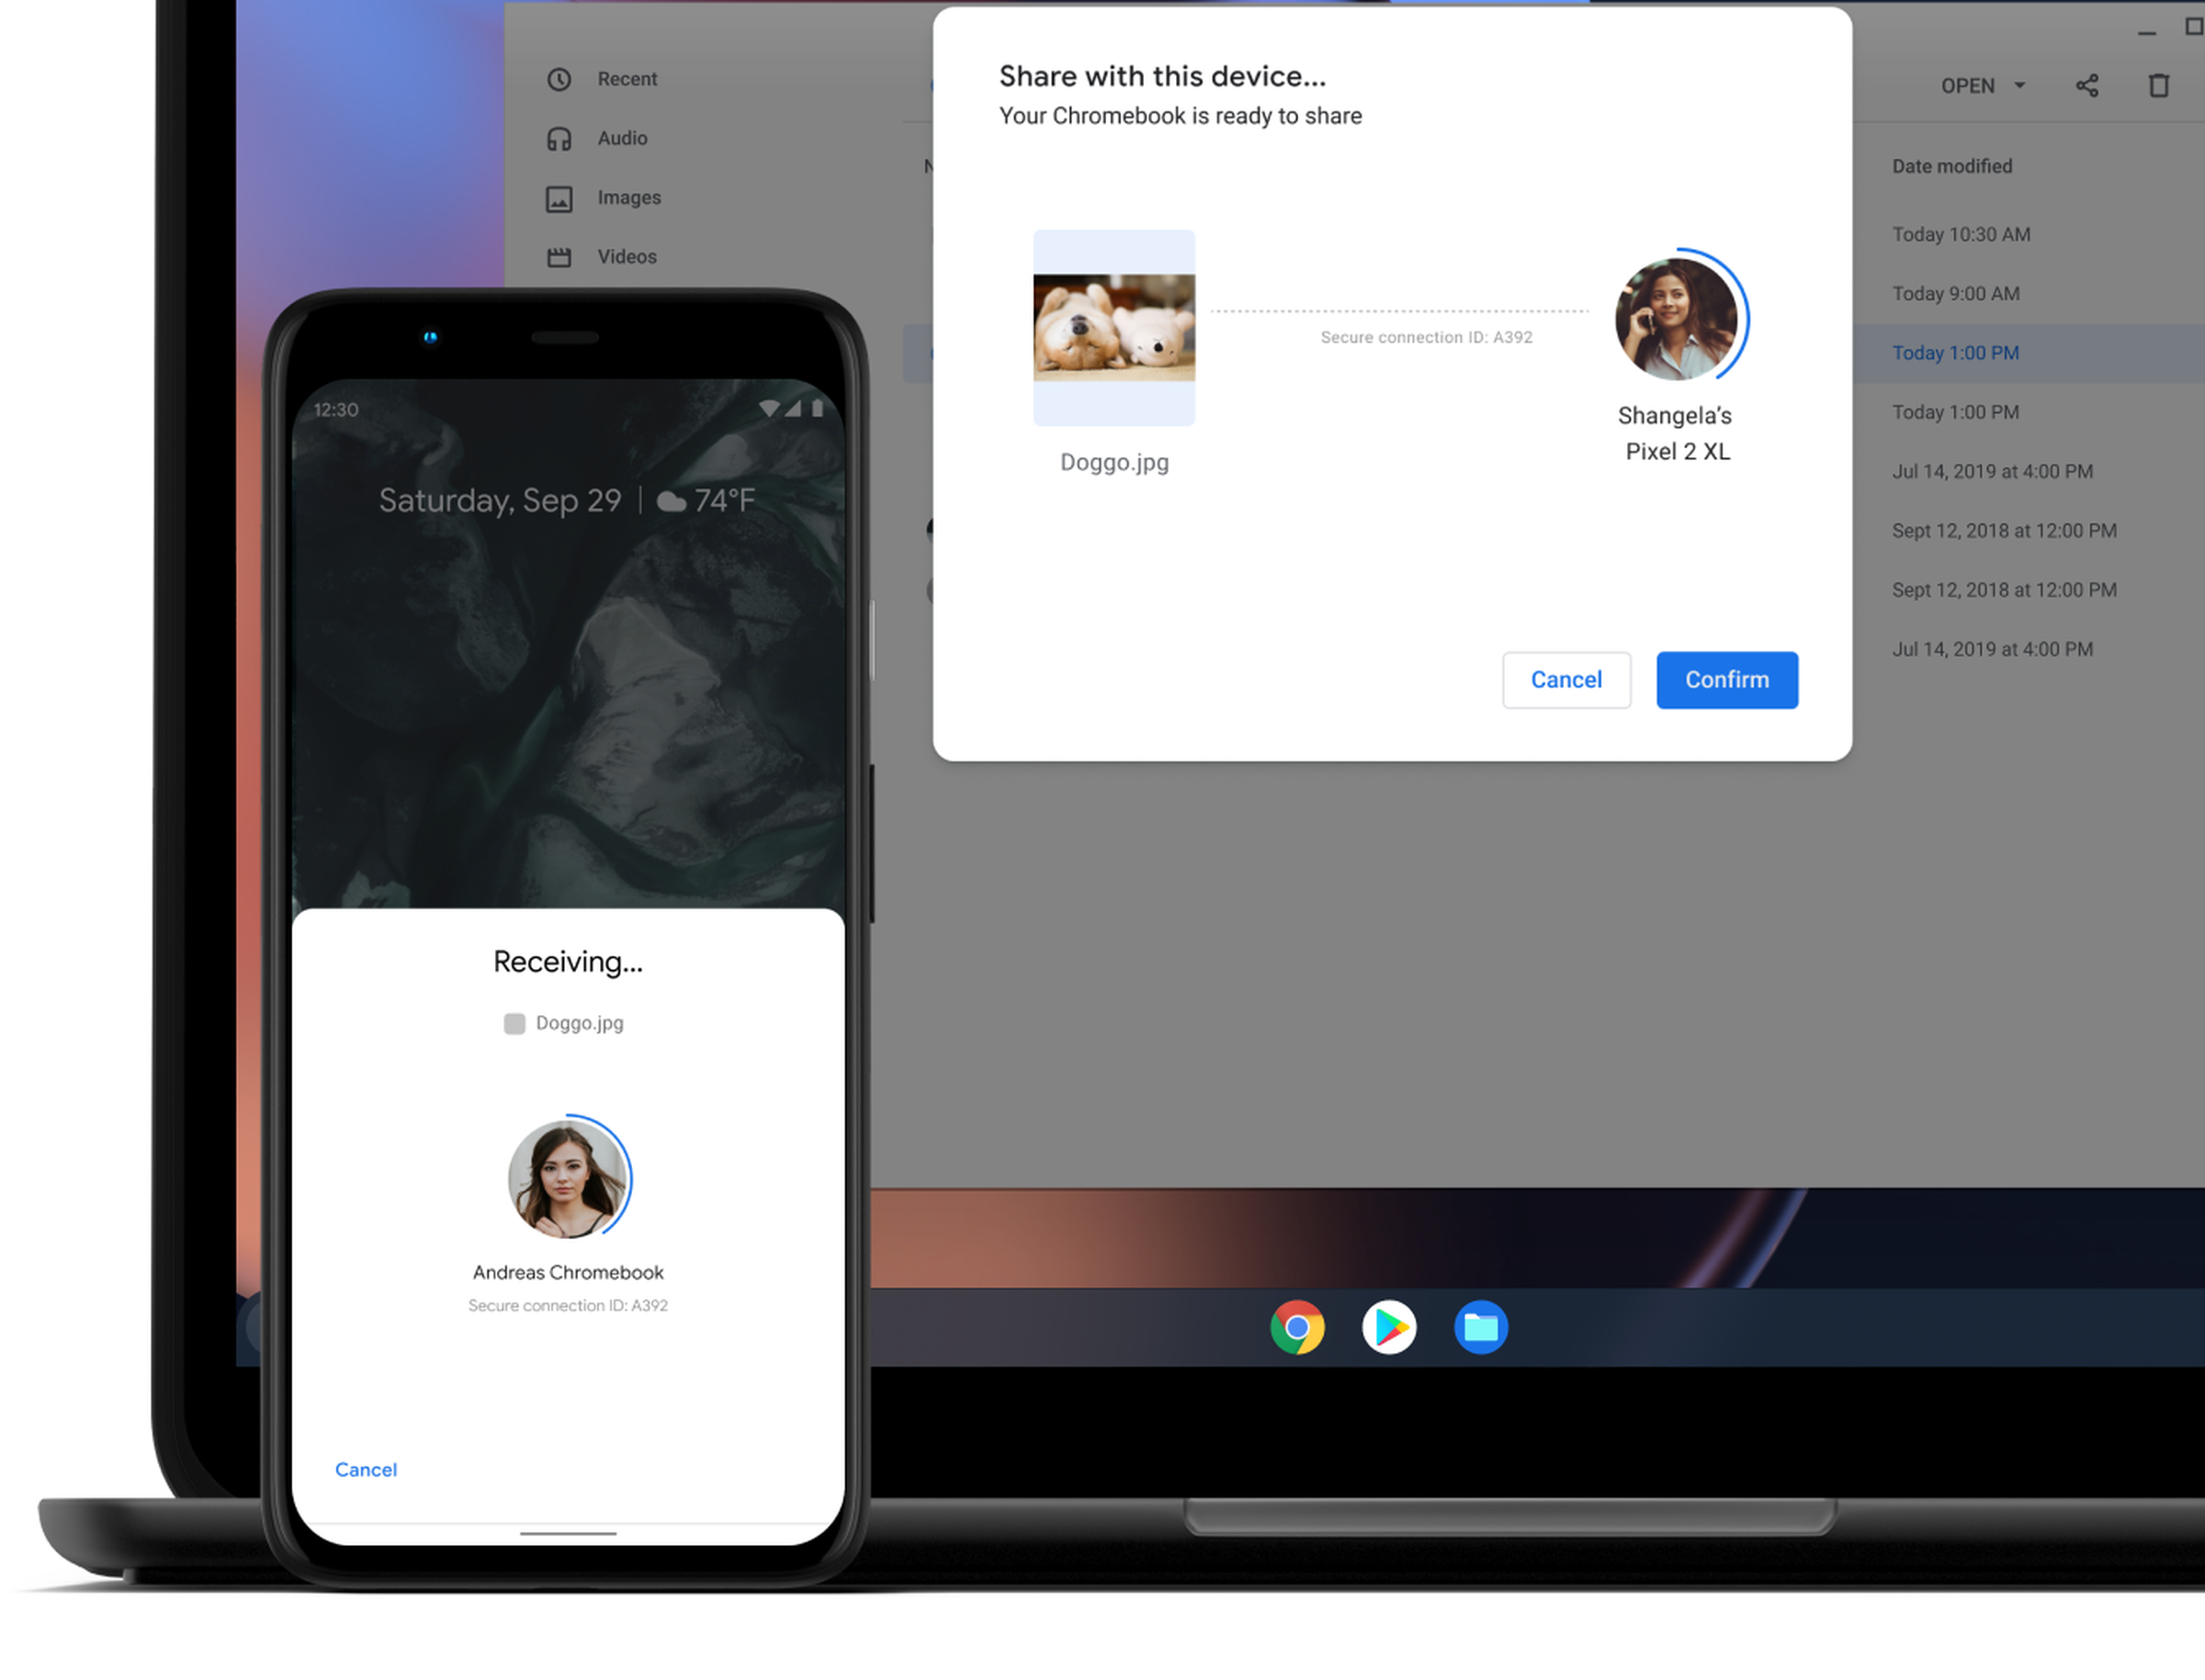 Chrome OS gets an AirDrop competitor.